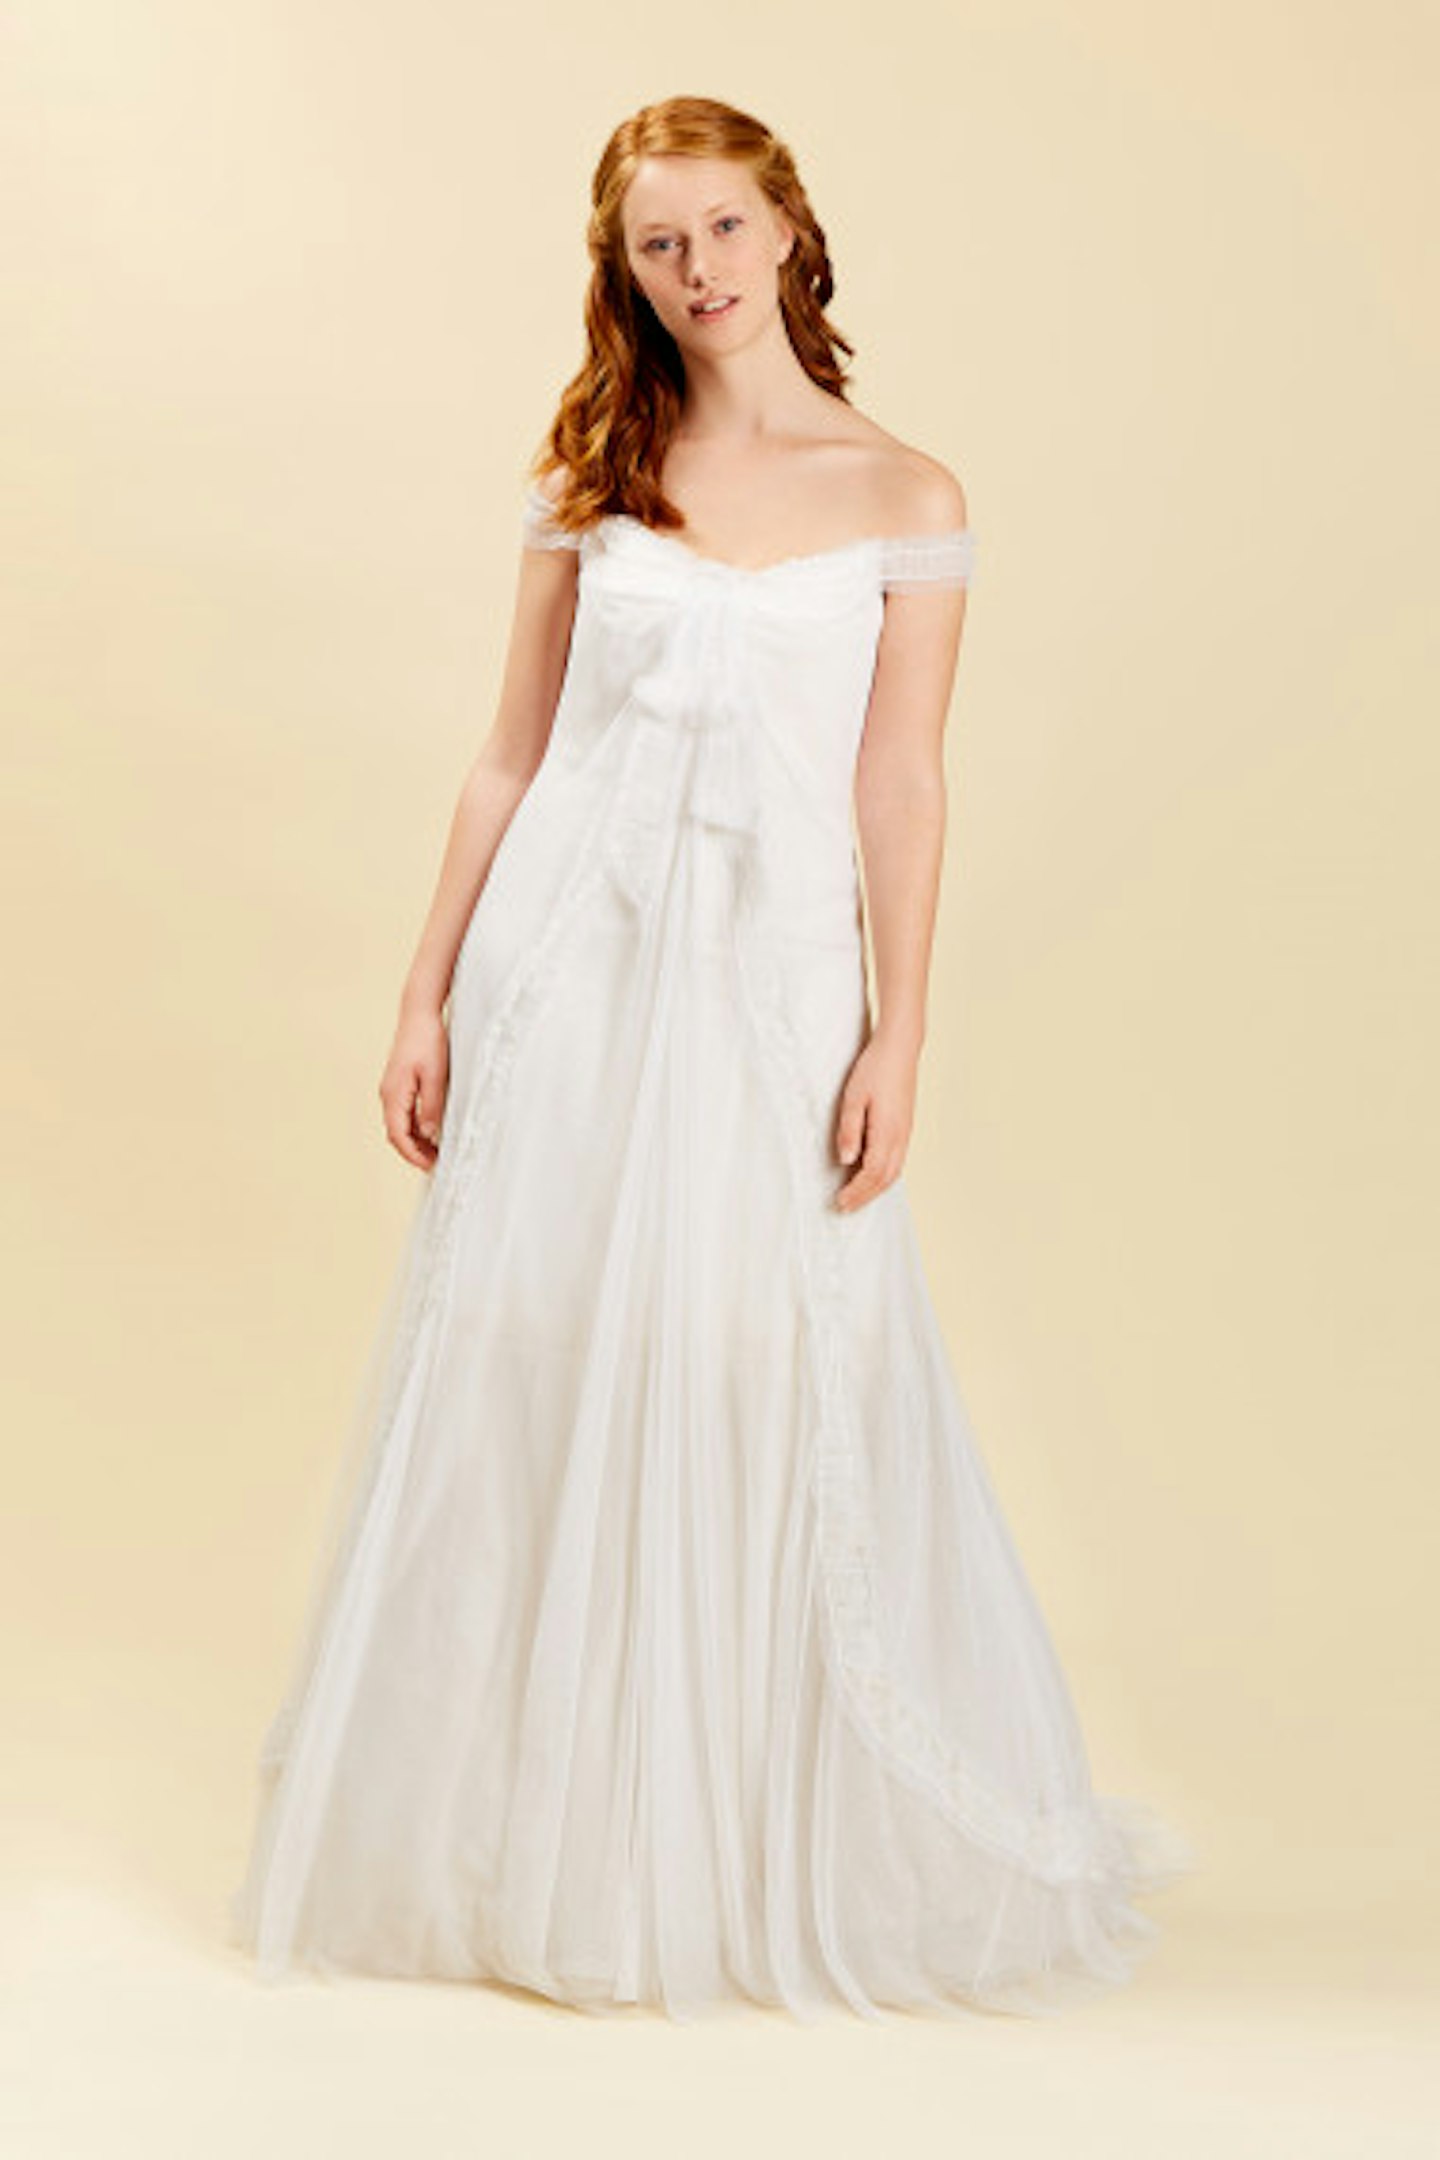 Vera Wang, Off-Shoulder Vintage-Style Wedding Dress, WAS £2,500, NOW £1,000